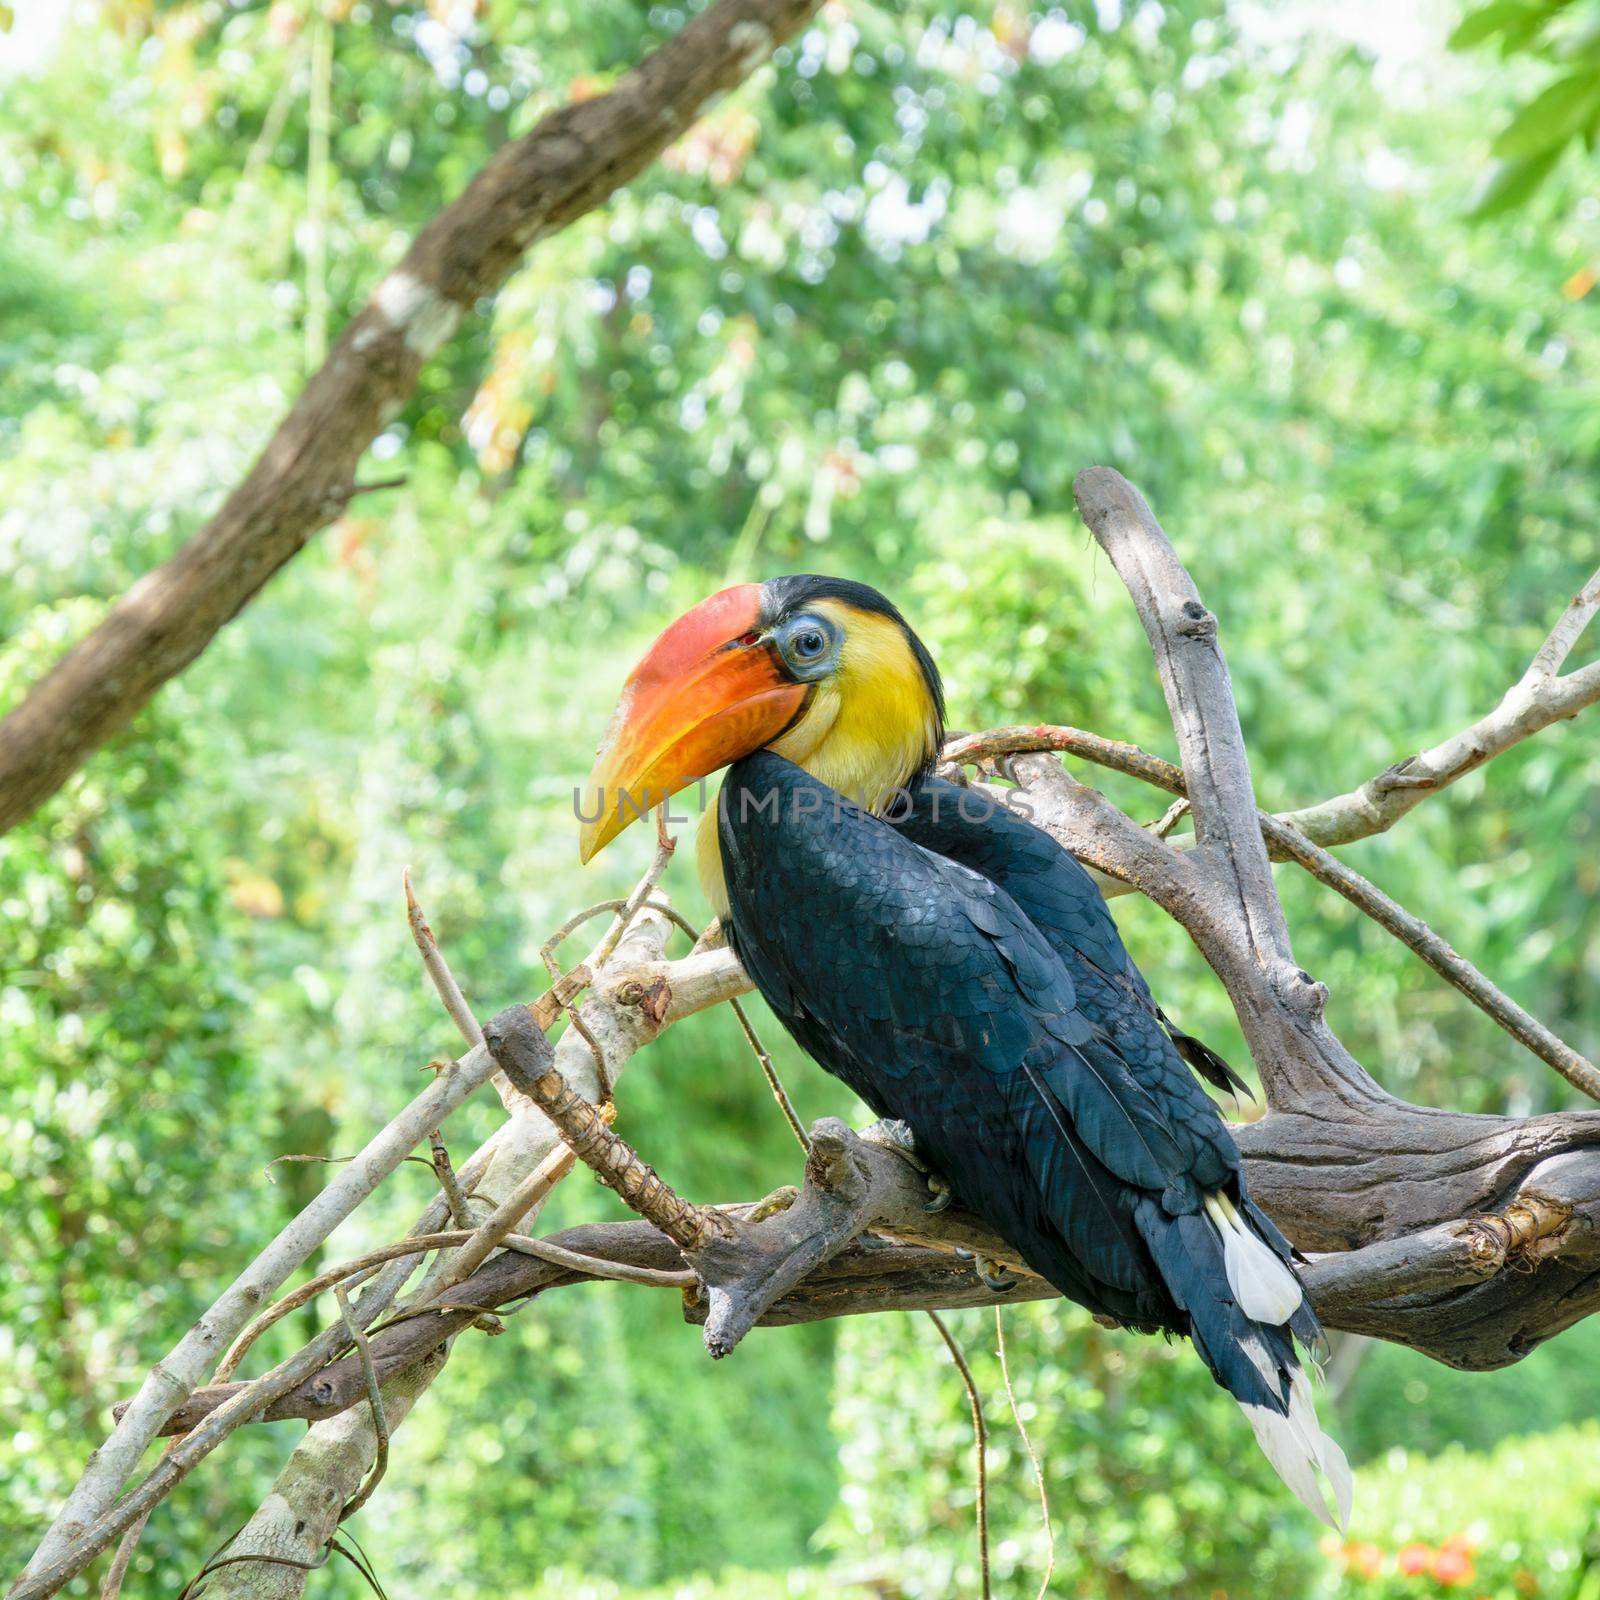 Wrinkled Hornbill, Sunda Wrinkled Hornbill or Aceros Corrugatus. It is a large bird with black feathers and the neck is bright yellow, red casque on top of its bill are perch on tree in Thailand